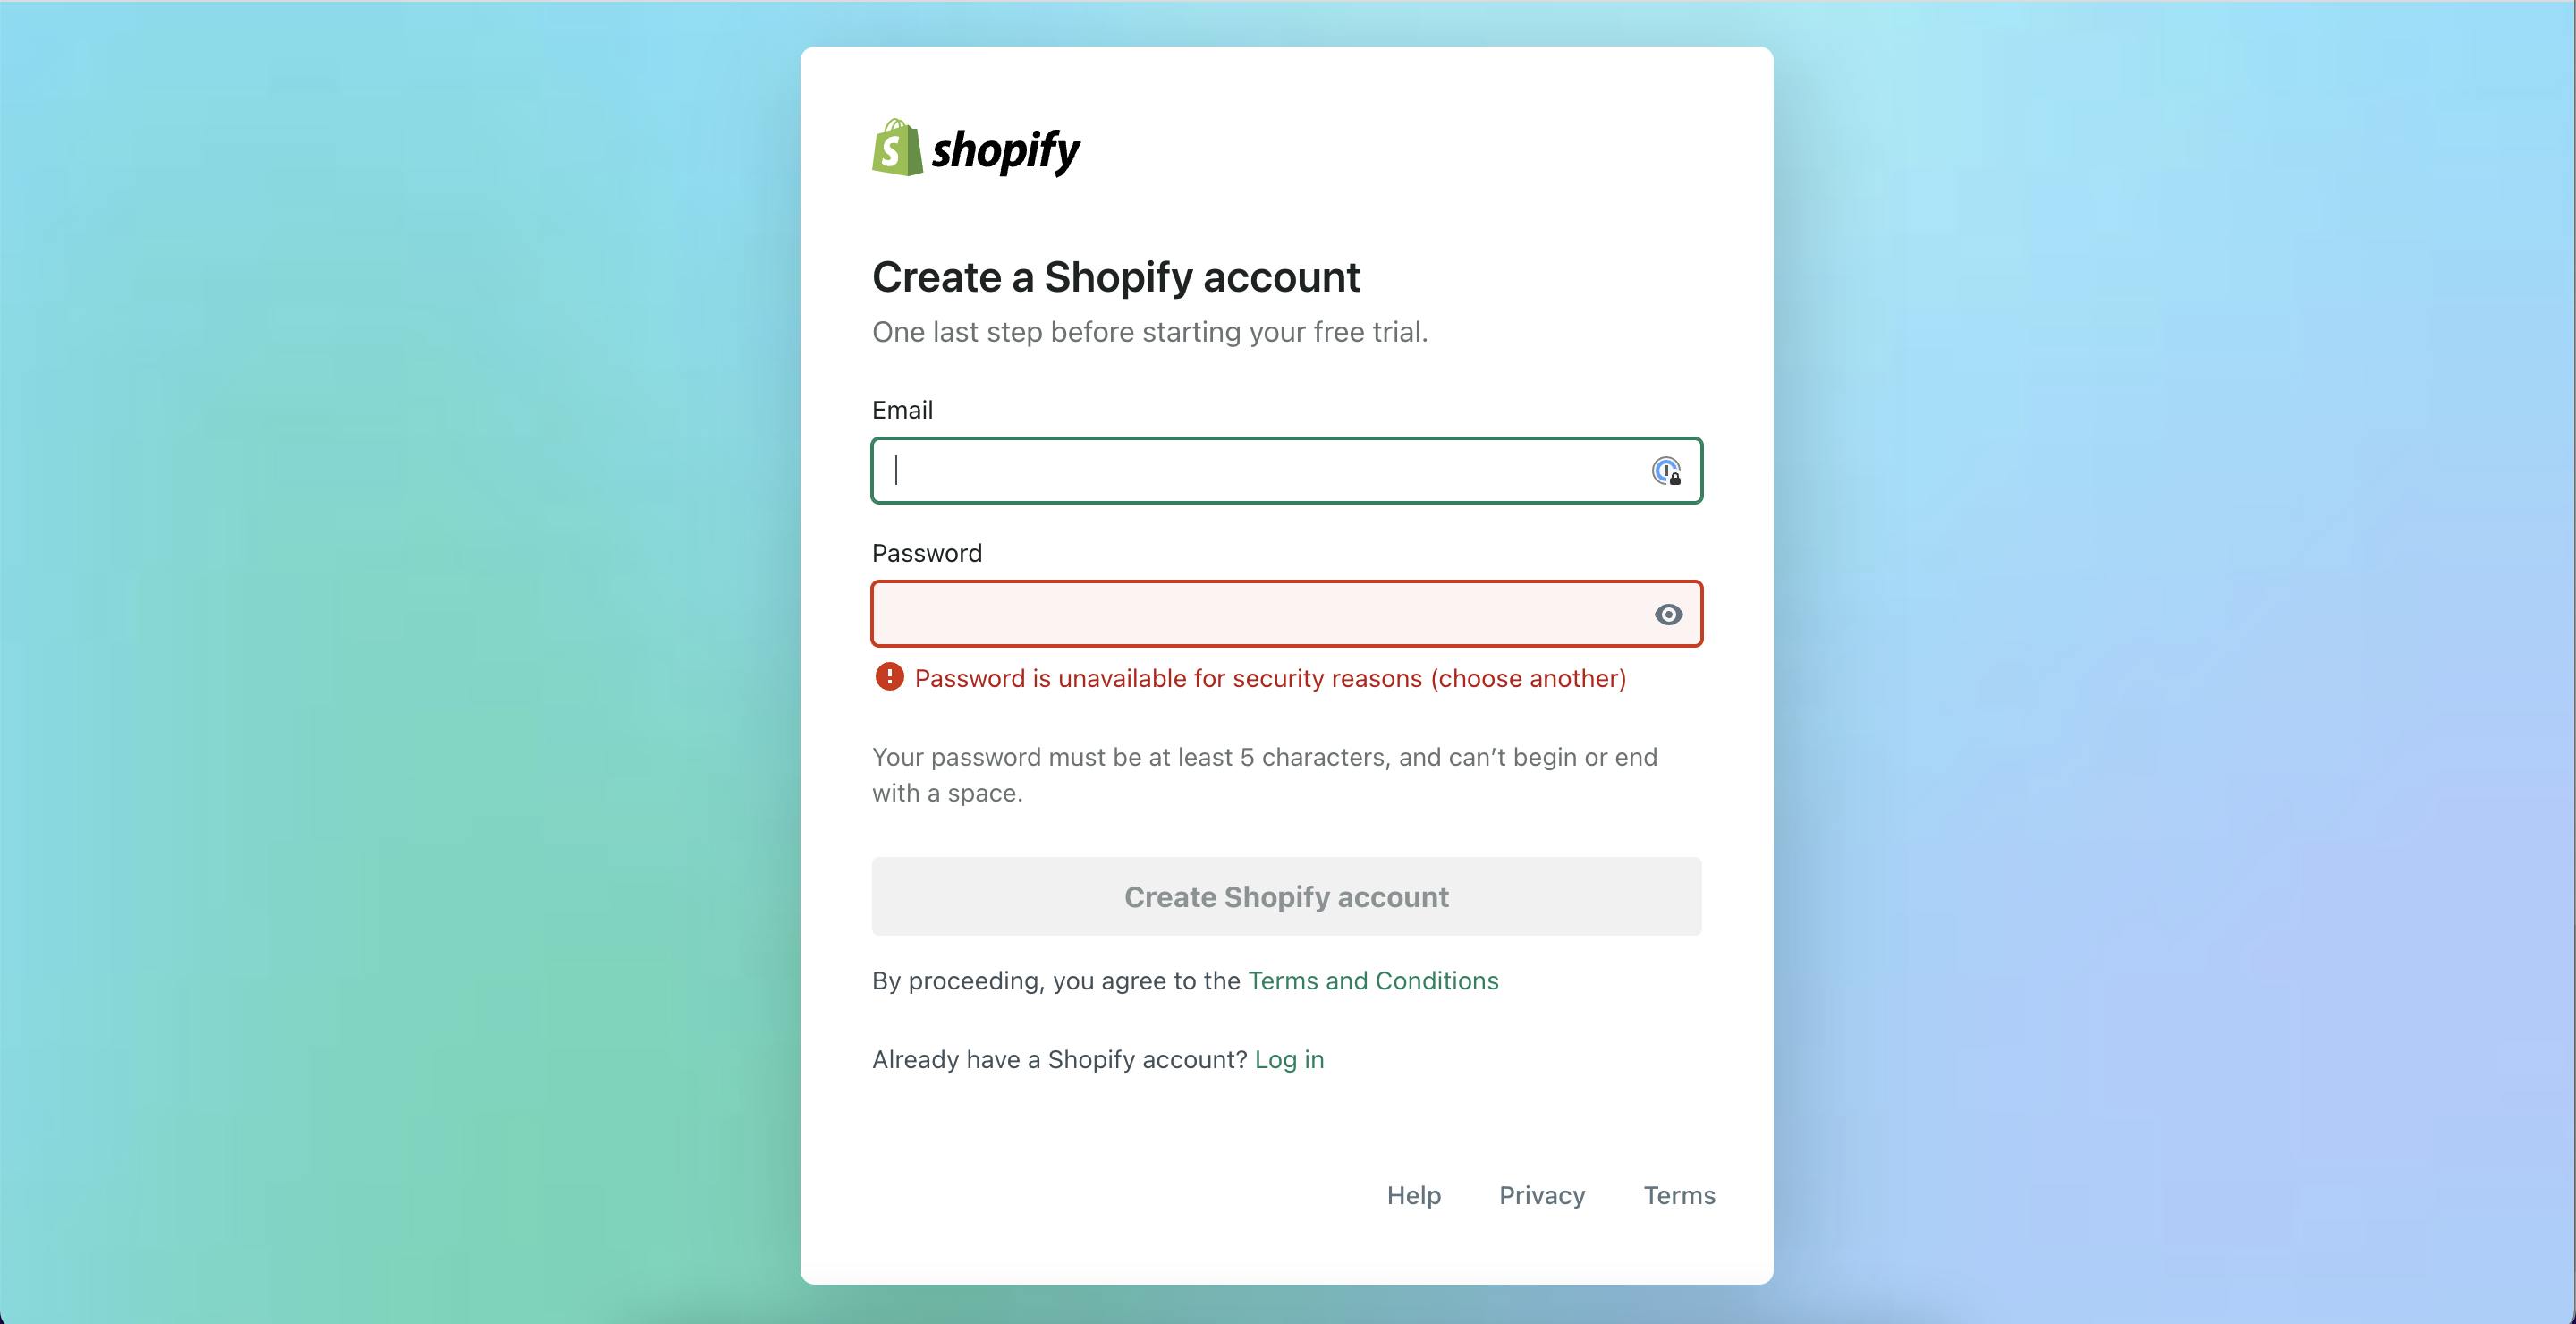 Shopify signups